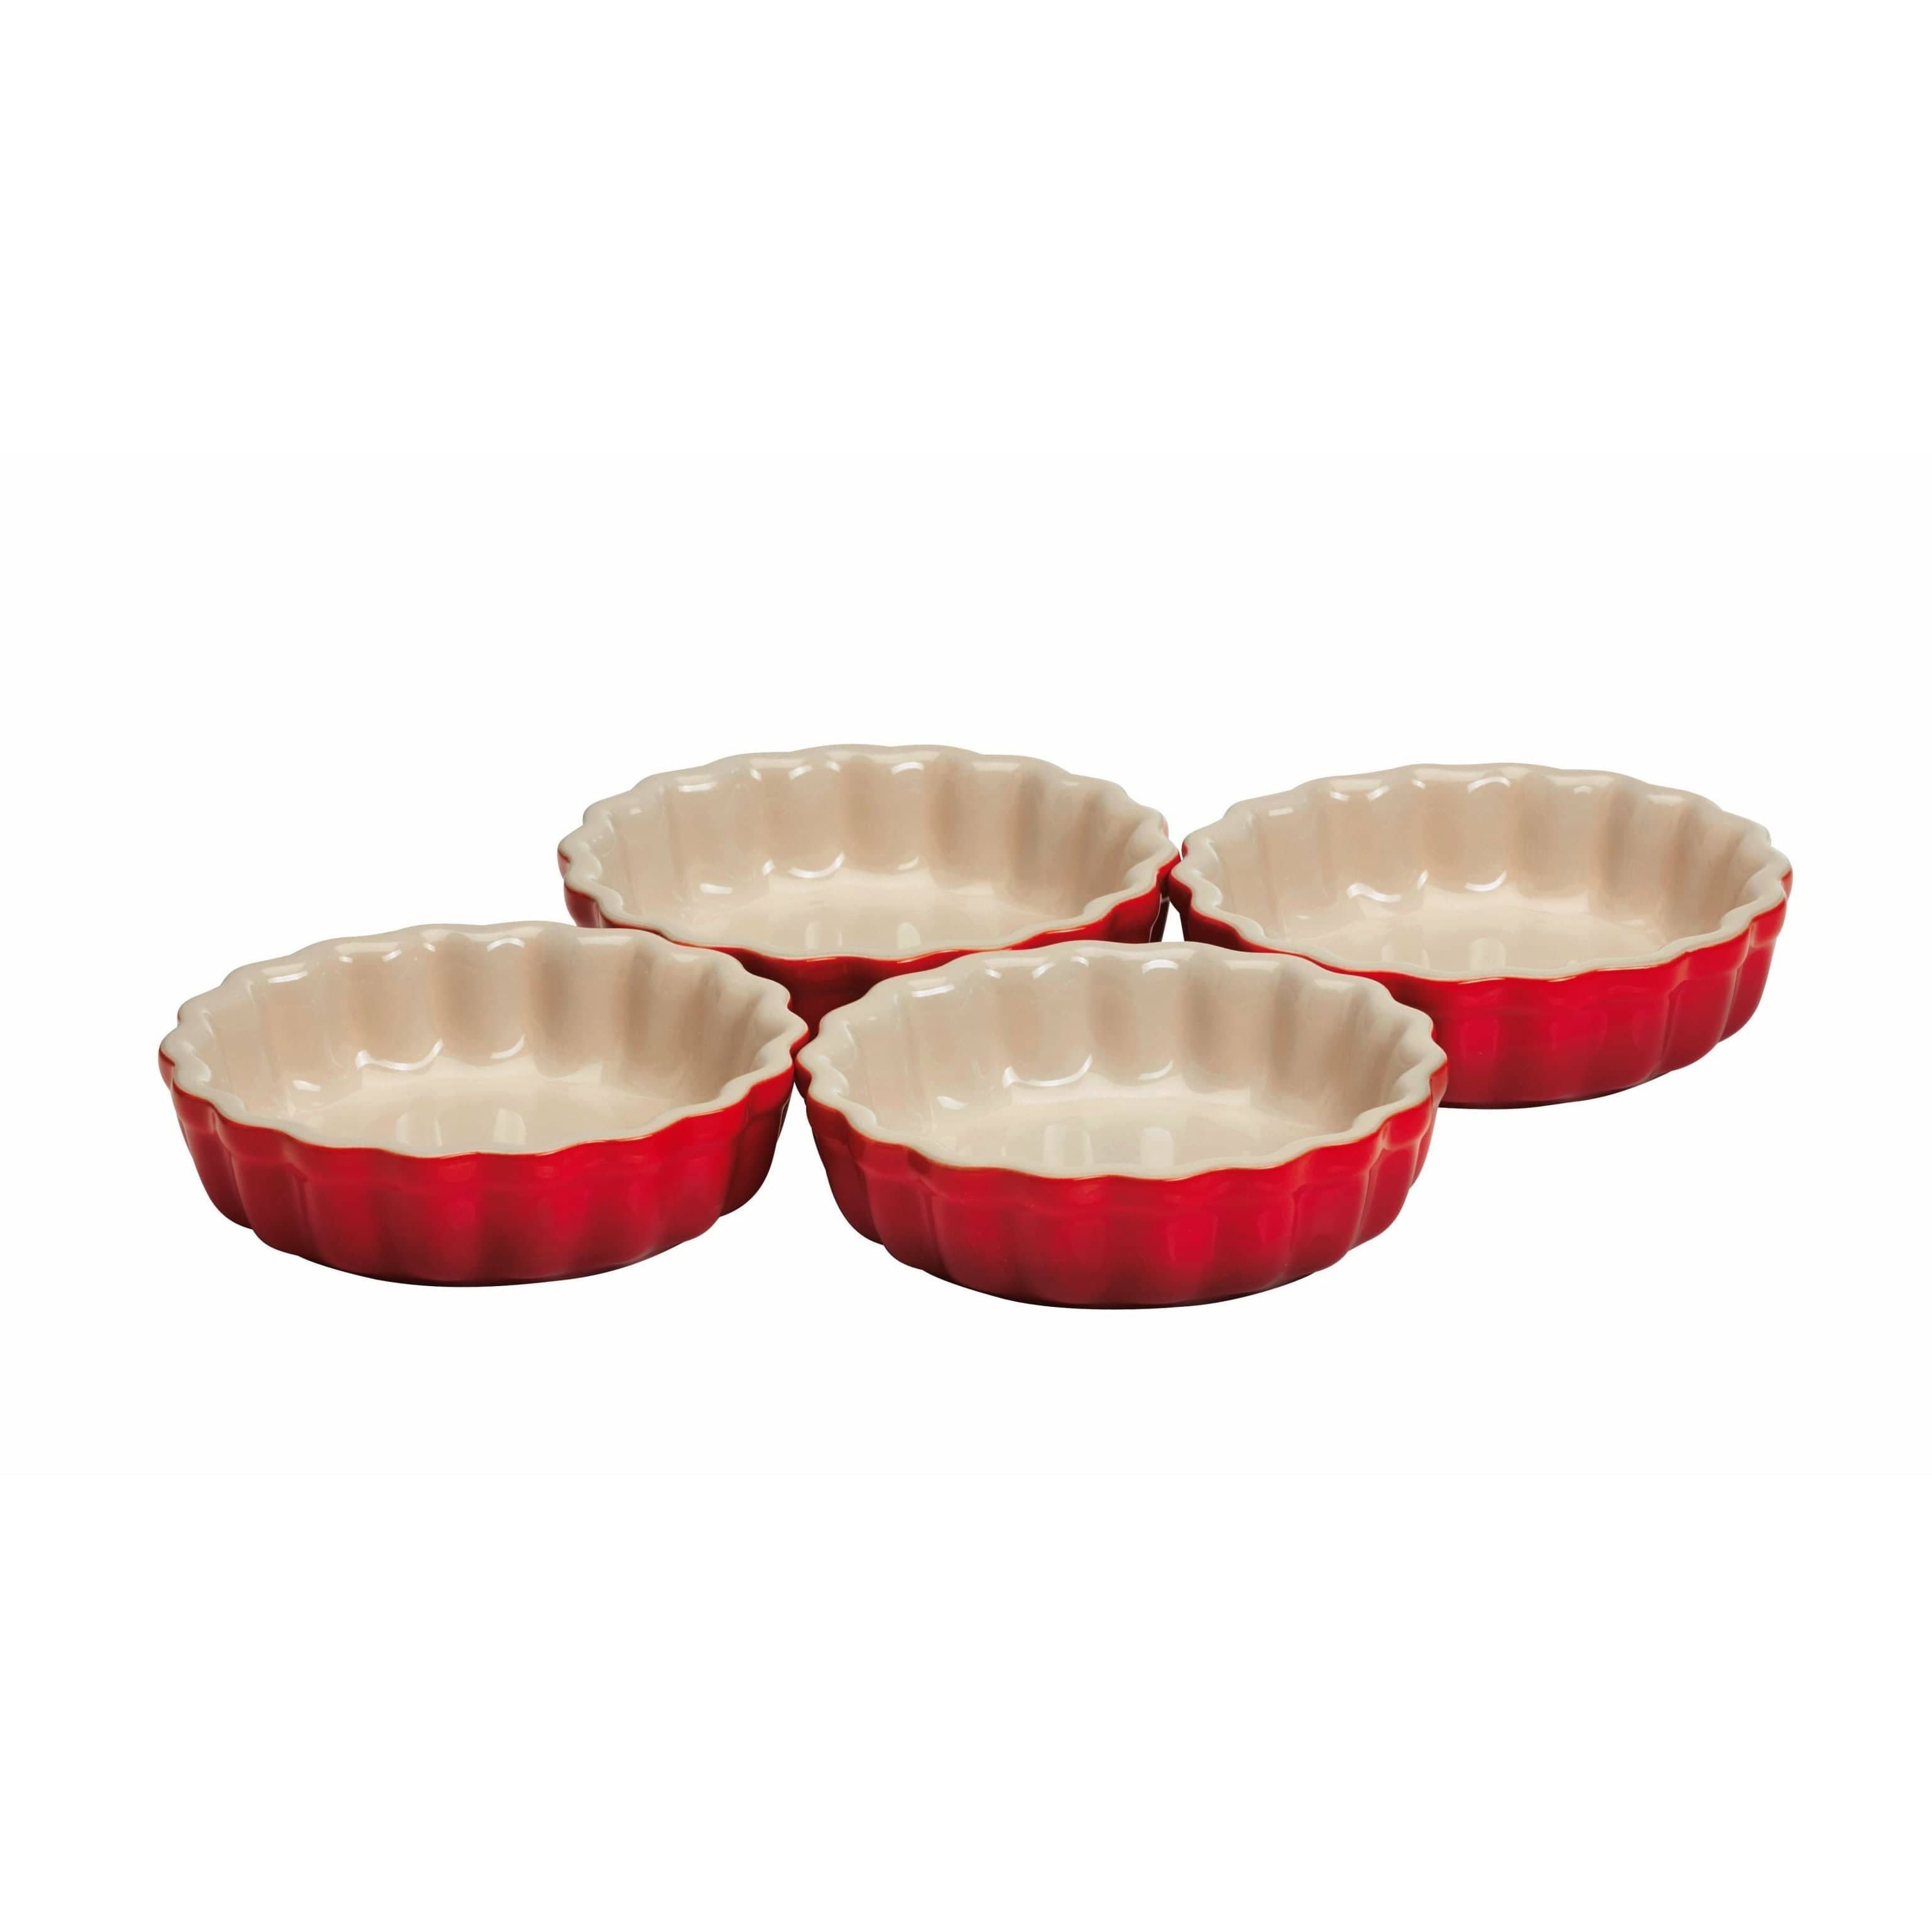 Le Creuset Heritage Set 4 Cups 11 cm, Cherry Red